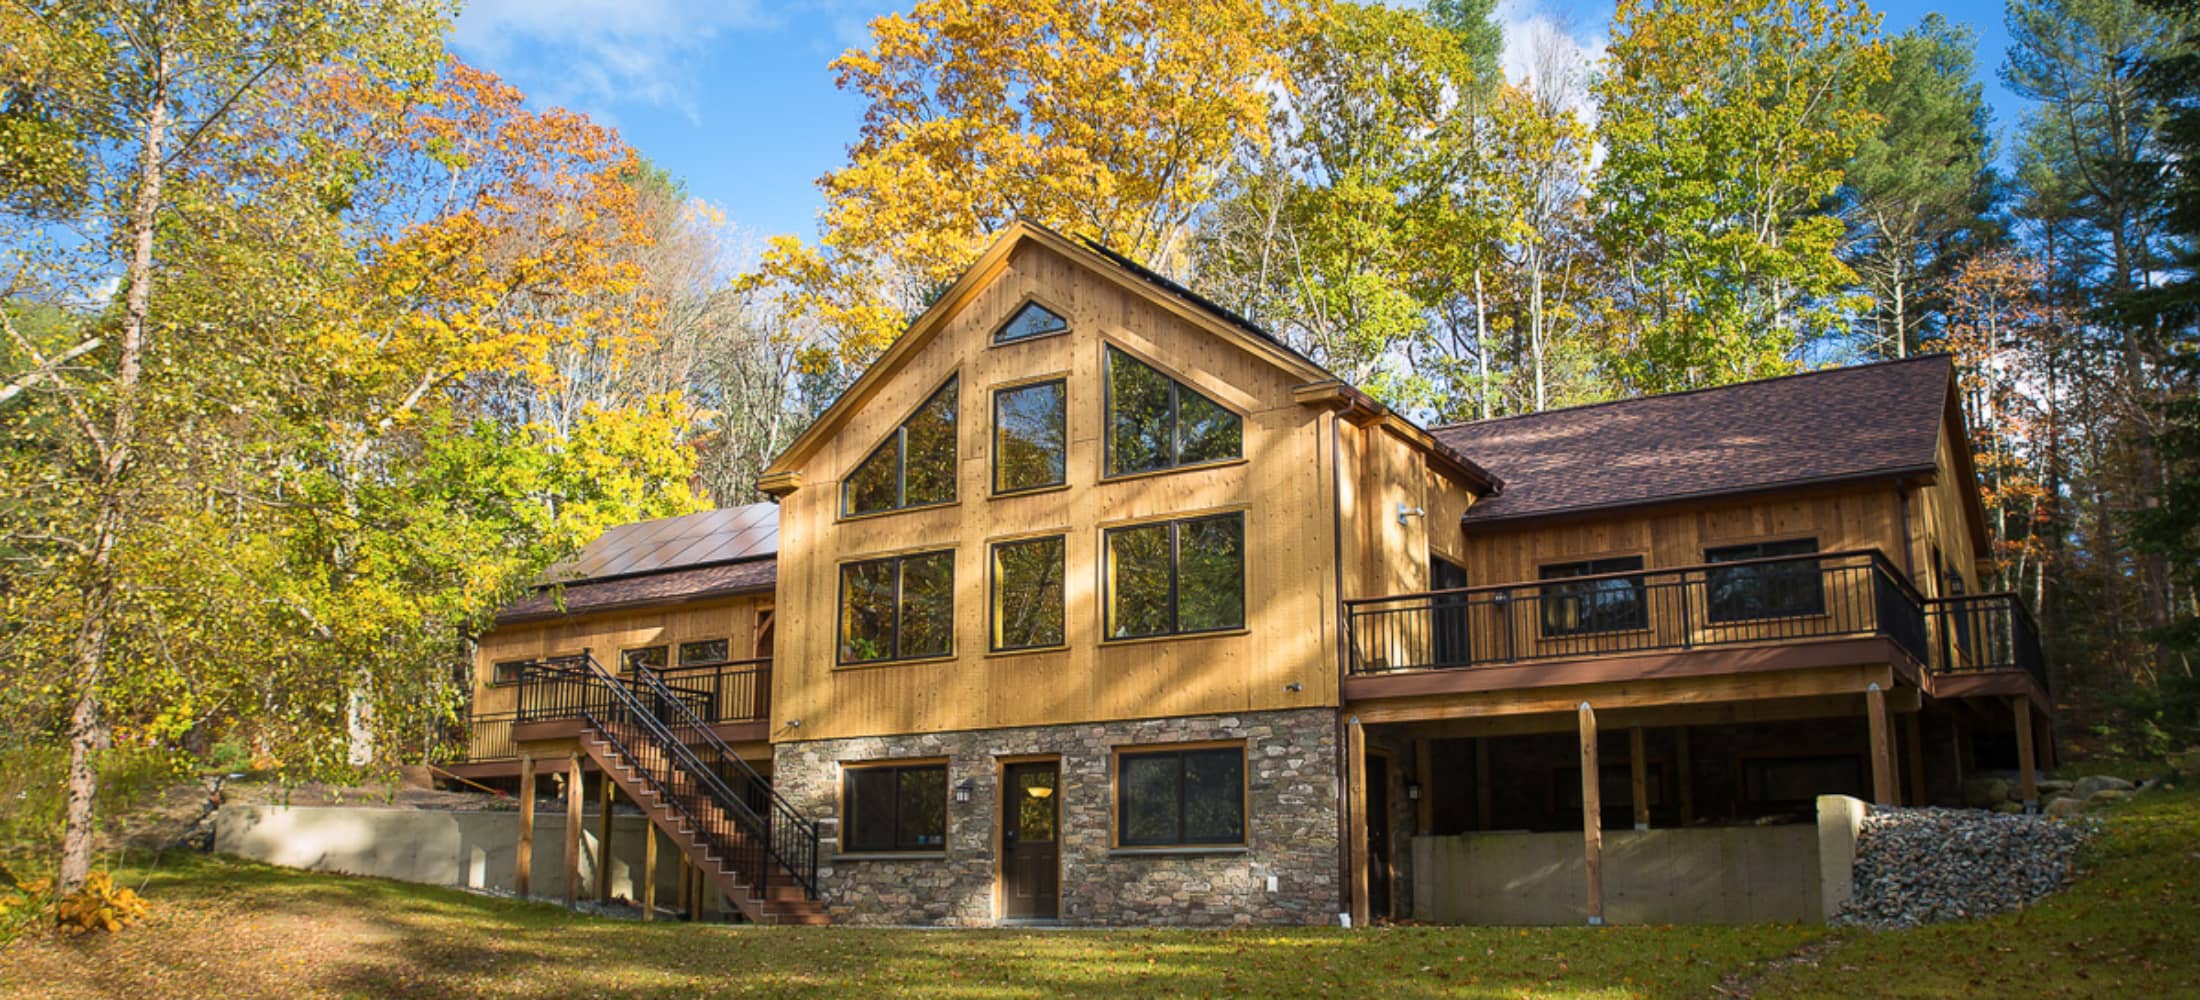 timber frame exterior with large windows and stone facade